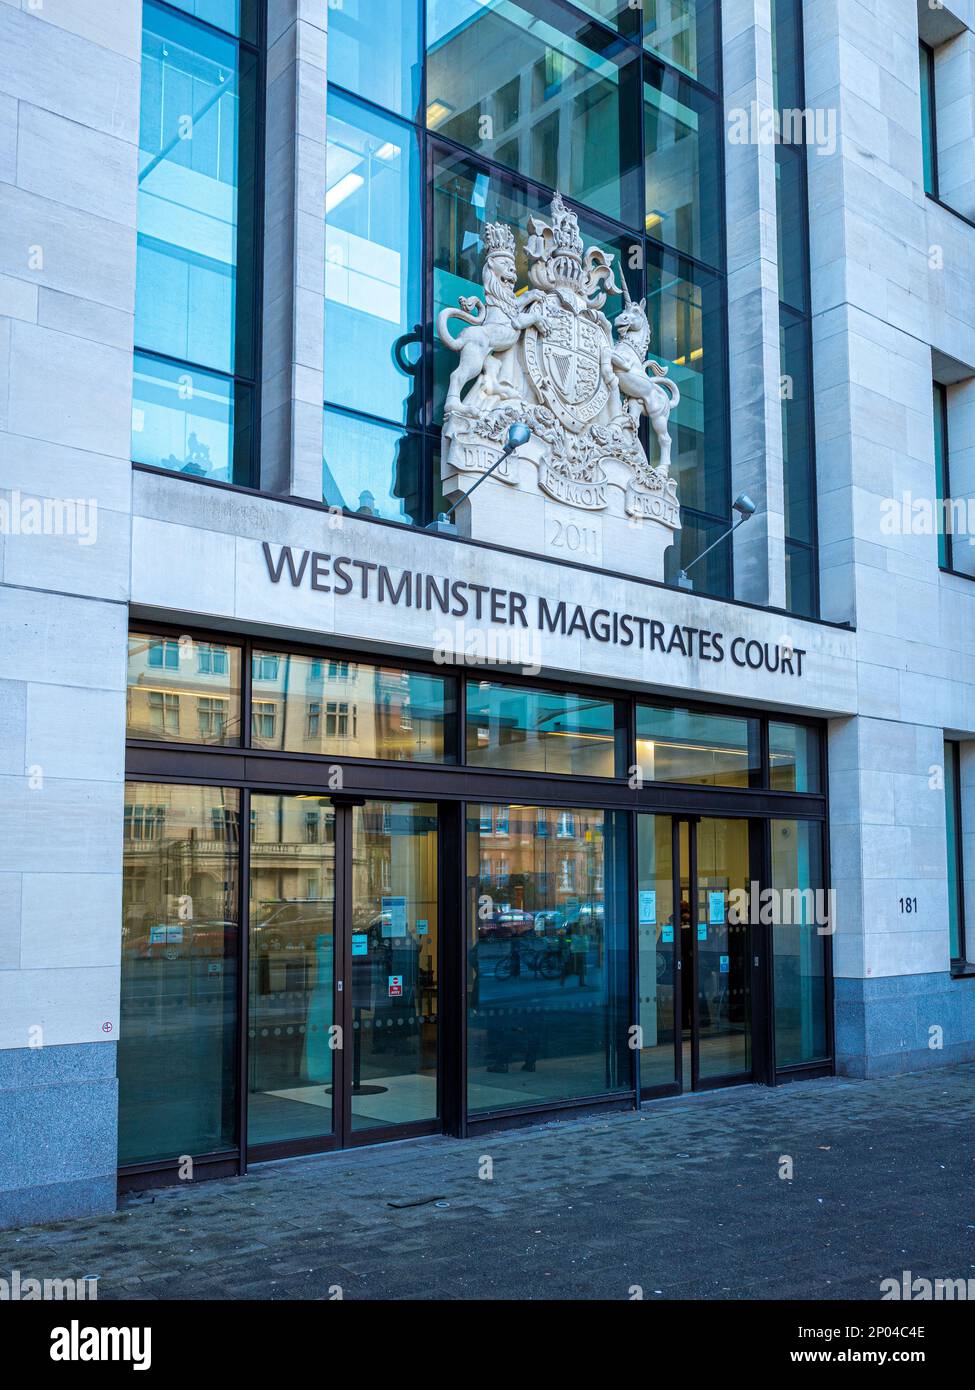 Westminster Magistrates Court London - Westminster Magistrates Court at 181 Marylebone Rd, London, UK. Building opened 2011. Stock Photo